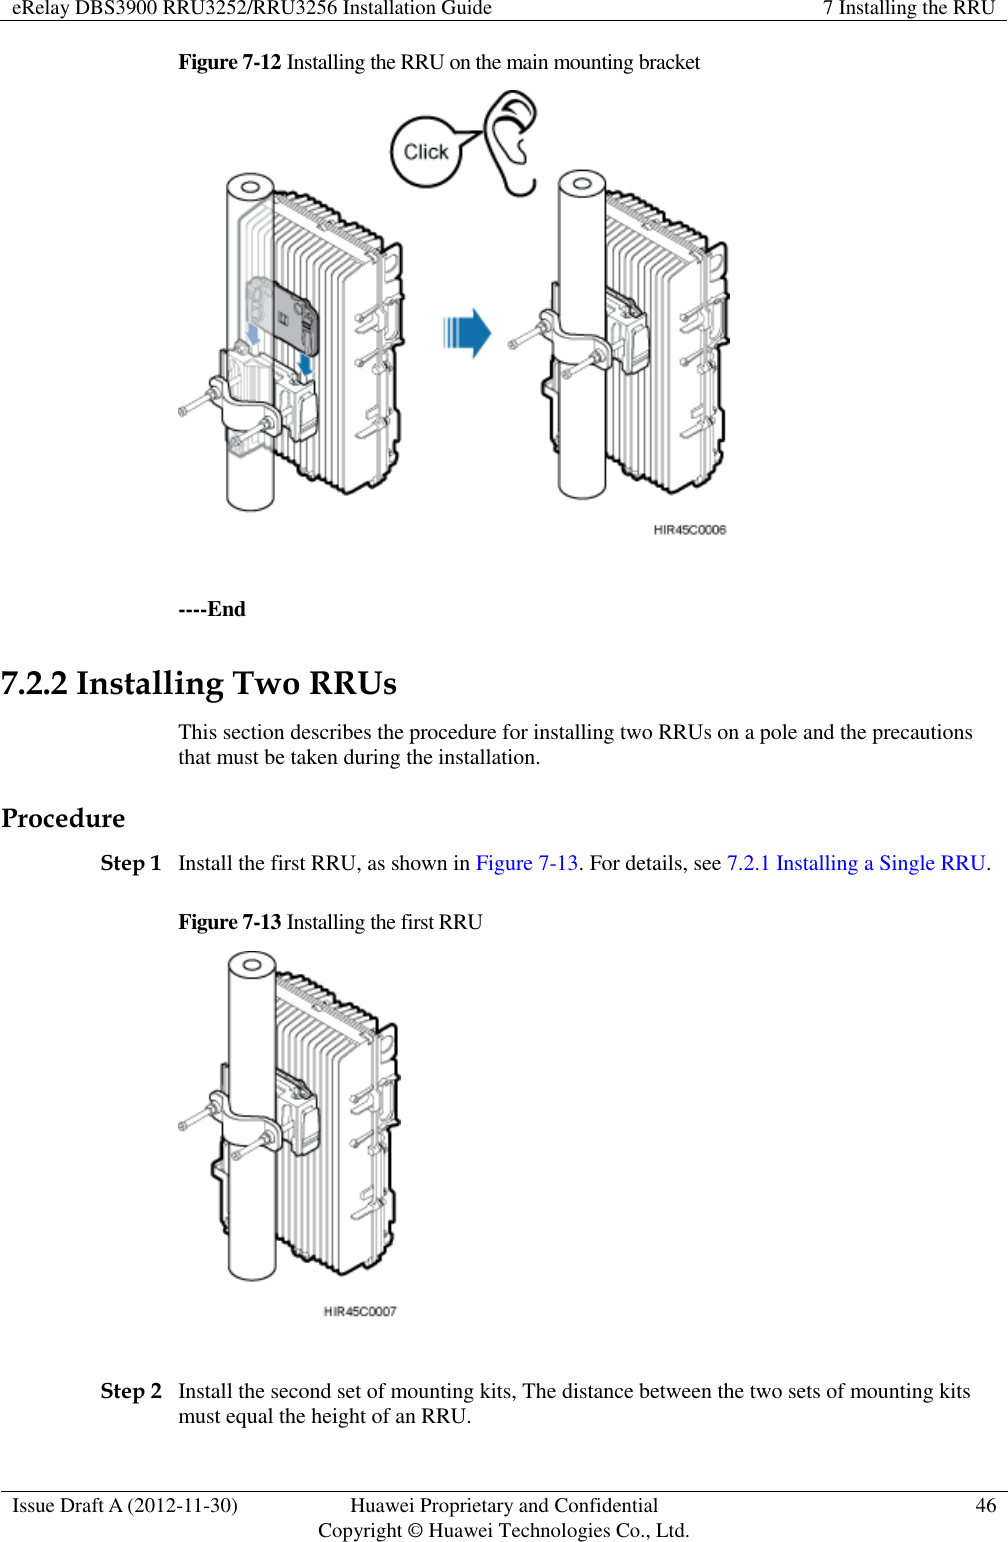 eRelay DBS3900 RRU3252/RRU3256 Installation Guide 7 Installing the RRU  Issue Draft A (2012-11-30) Huawei Proprietary and Confidential                                     Copyright © Huawei Technologies Co., Ltd. 46  Figure 7-12 Installing the RRU on the main mounting bracket   ----End 7.2.2 Installing Two RRUs This section describes the procedure for installing two RRUs on a pole and the precautions that must be taken during the installation. Procedure Step 1 Install the first RRU, as shown in Figure 7-13. For details, see 7.2.1 Installing a Single RRU. Figure 7-13 Installing the first RRU   Step 2 Install the second set of mounting kits, The distance between the two sets of mounting kits must equal the height of an RRU. 